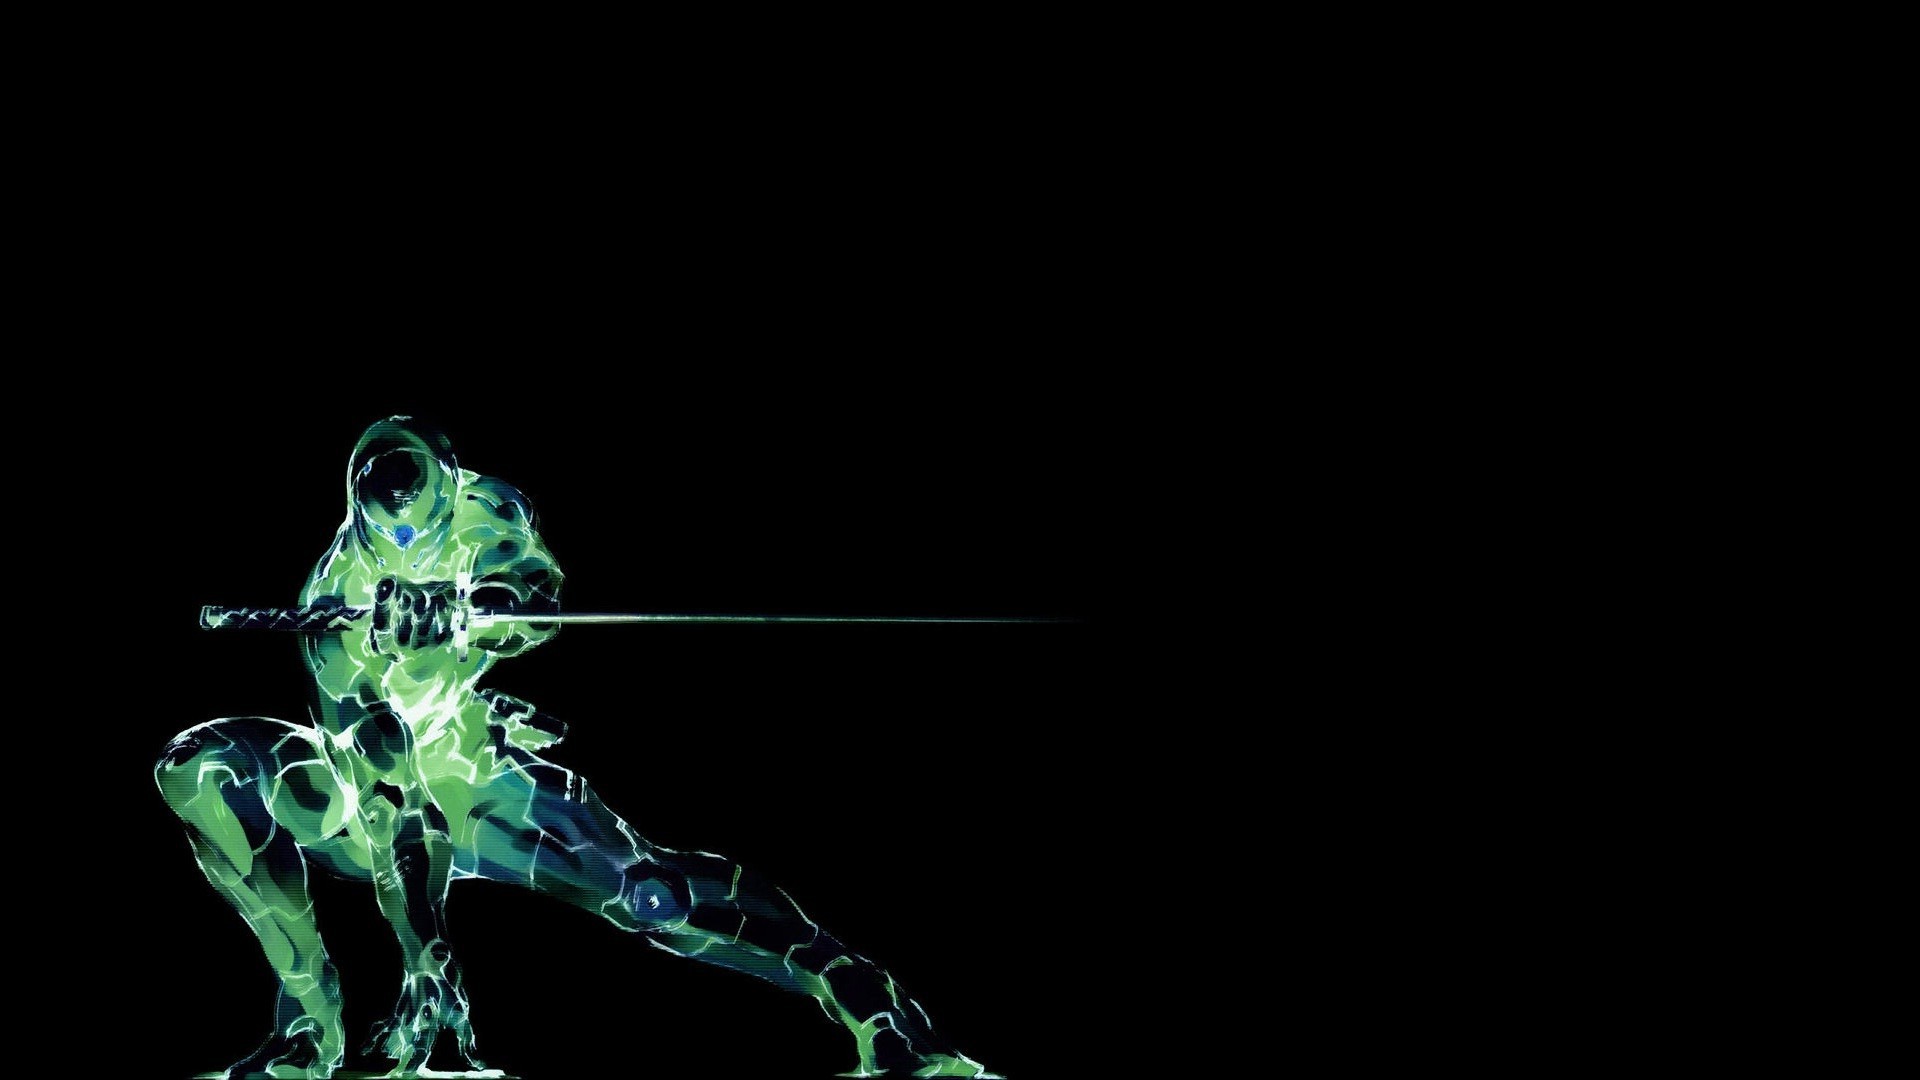 video Games, Grey Fox, Metal Gear Solid, Black Background, Simple  Background, Ninjas, Cyborg Wallpapers HD / Desktop and Mobile Backgrounds